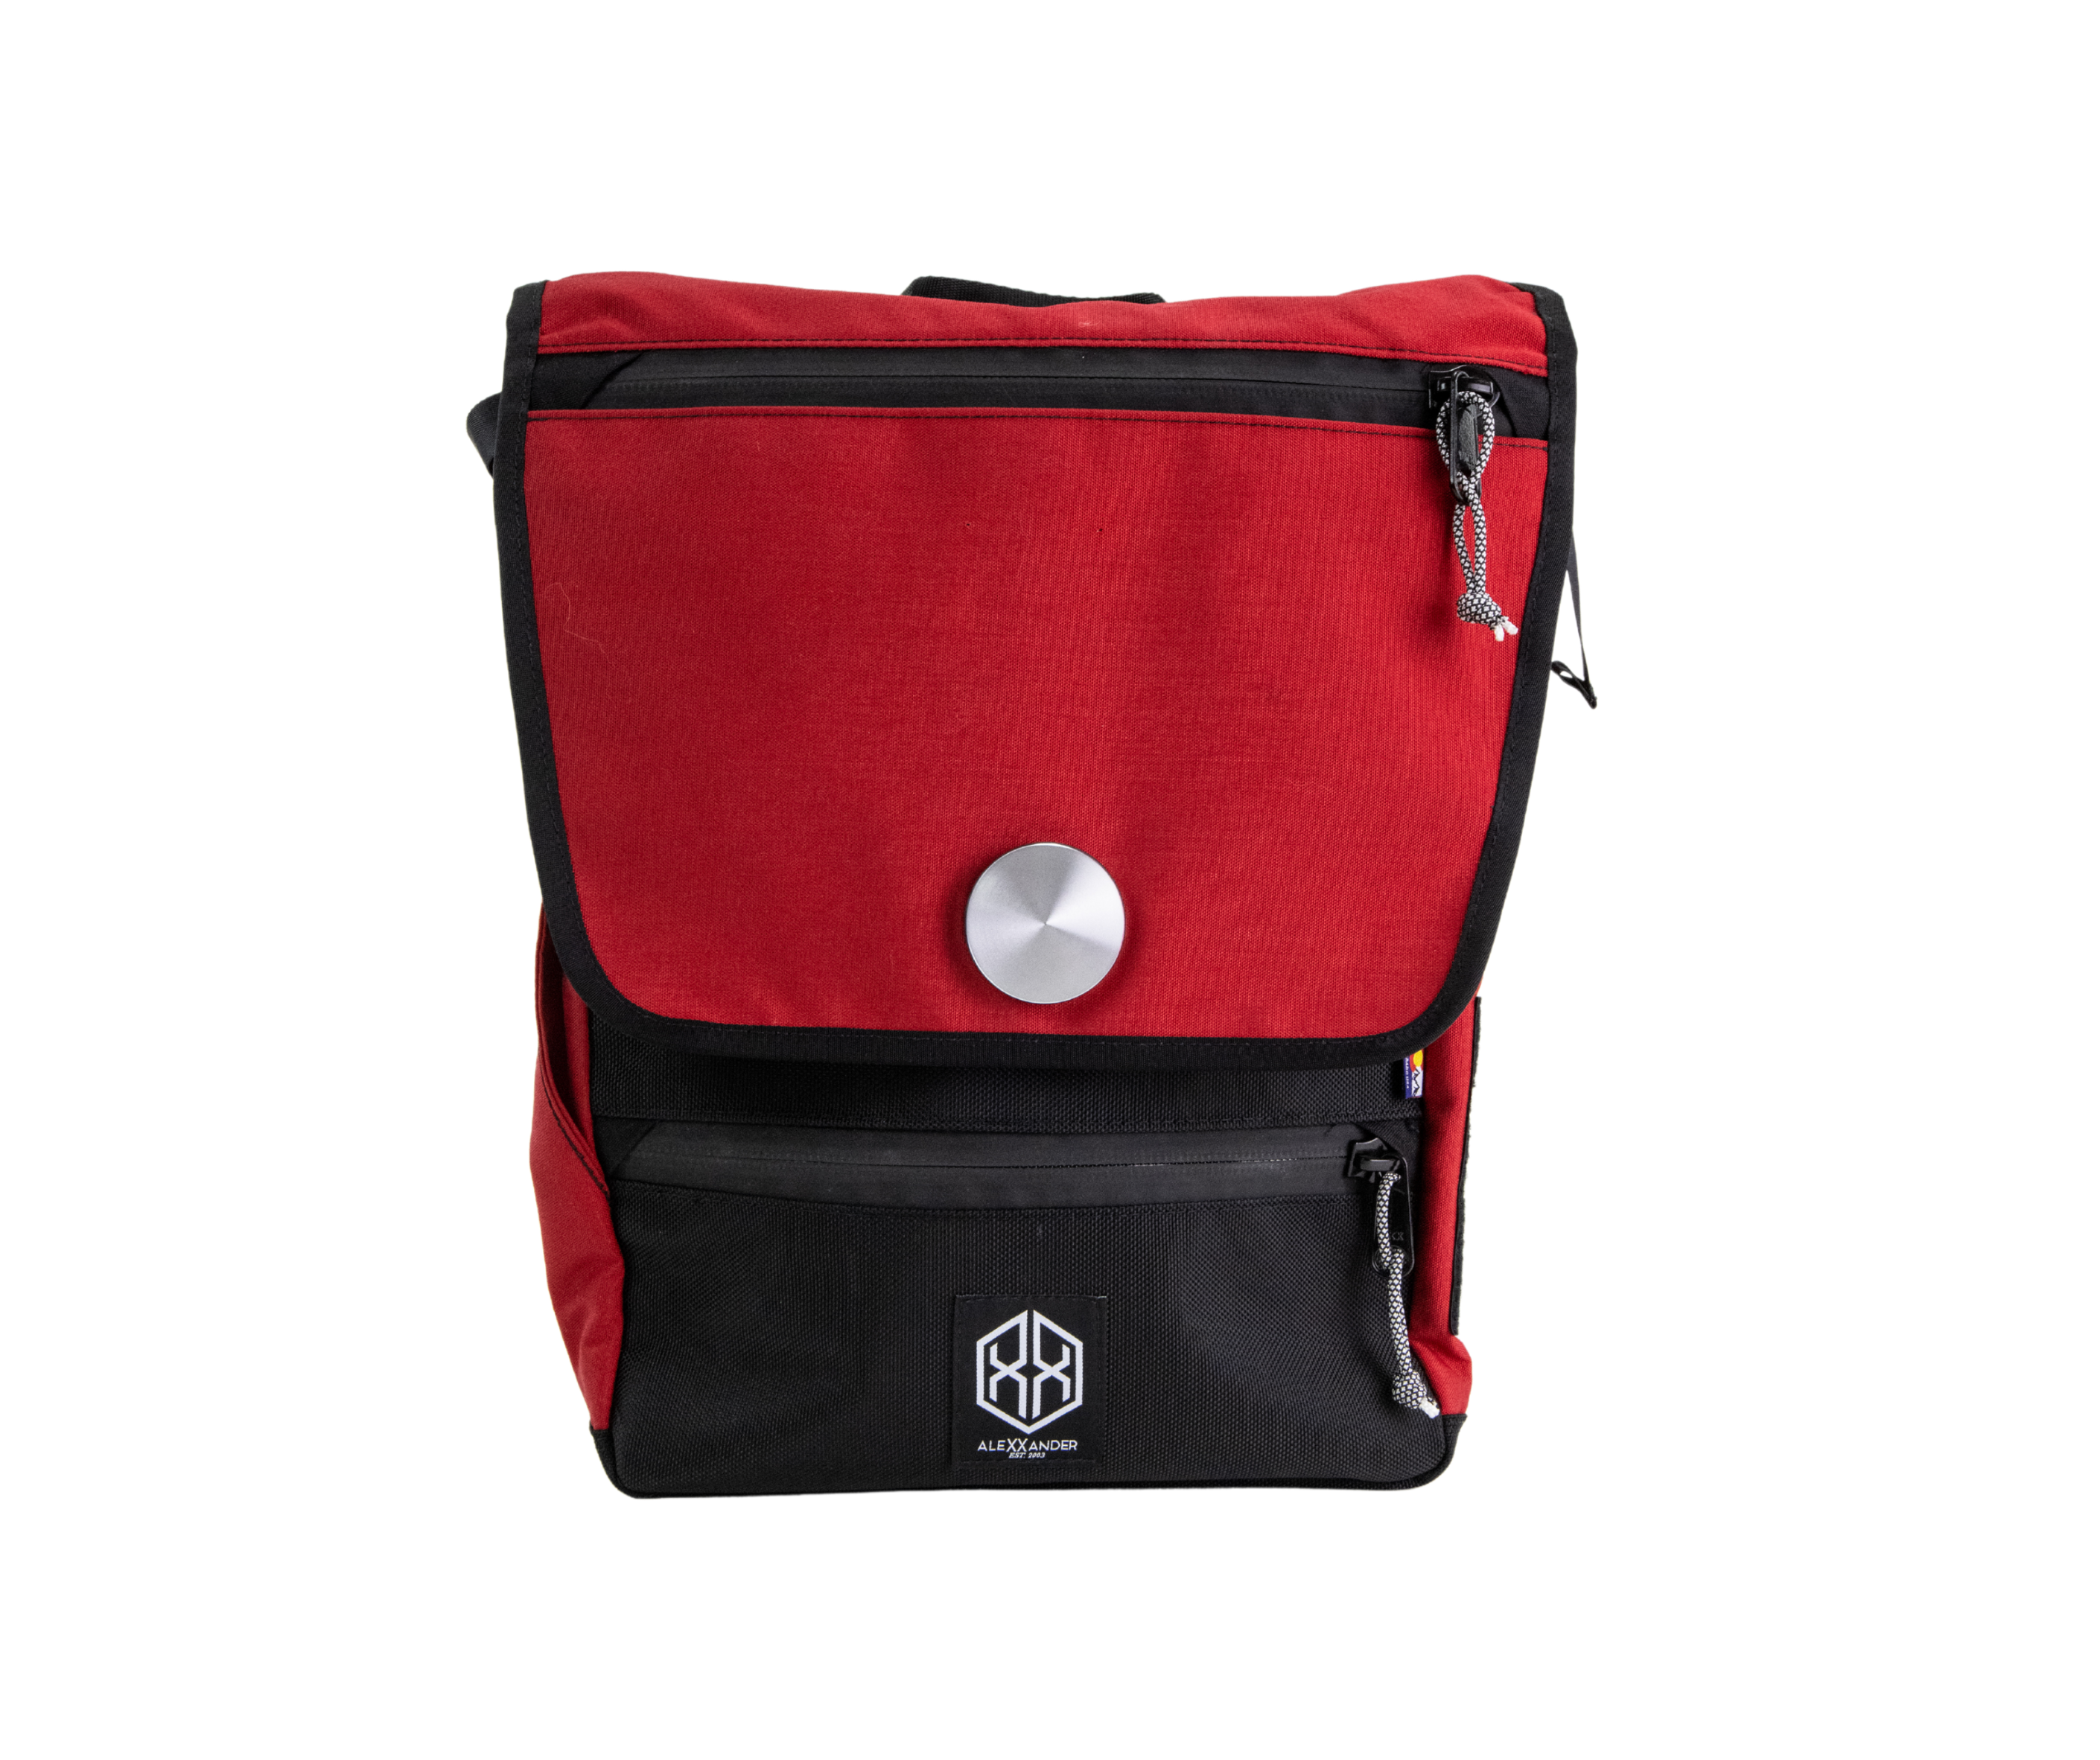 Neo Backpack - Red